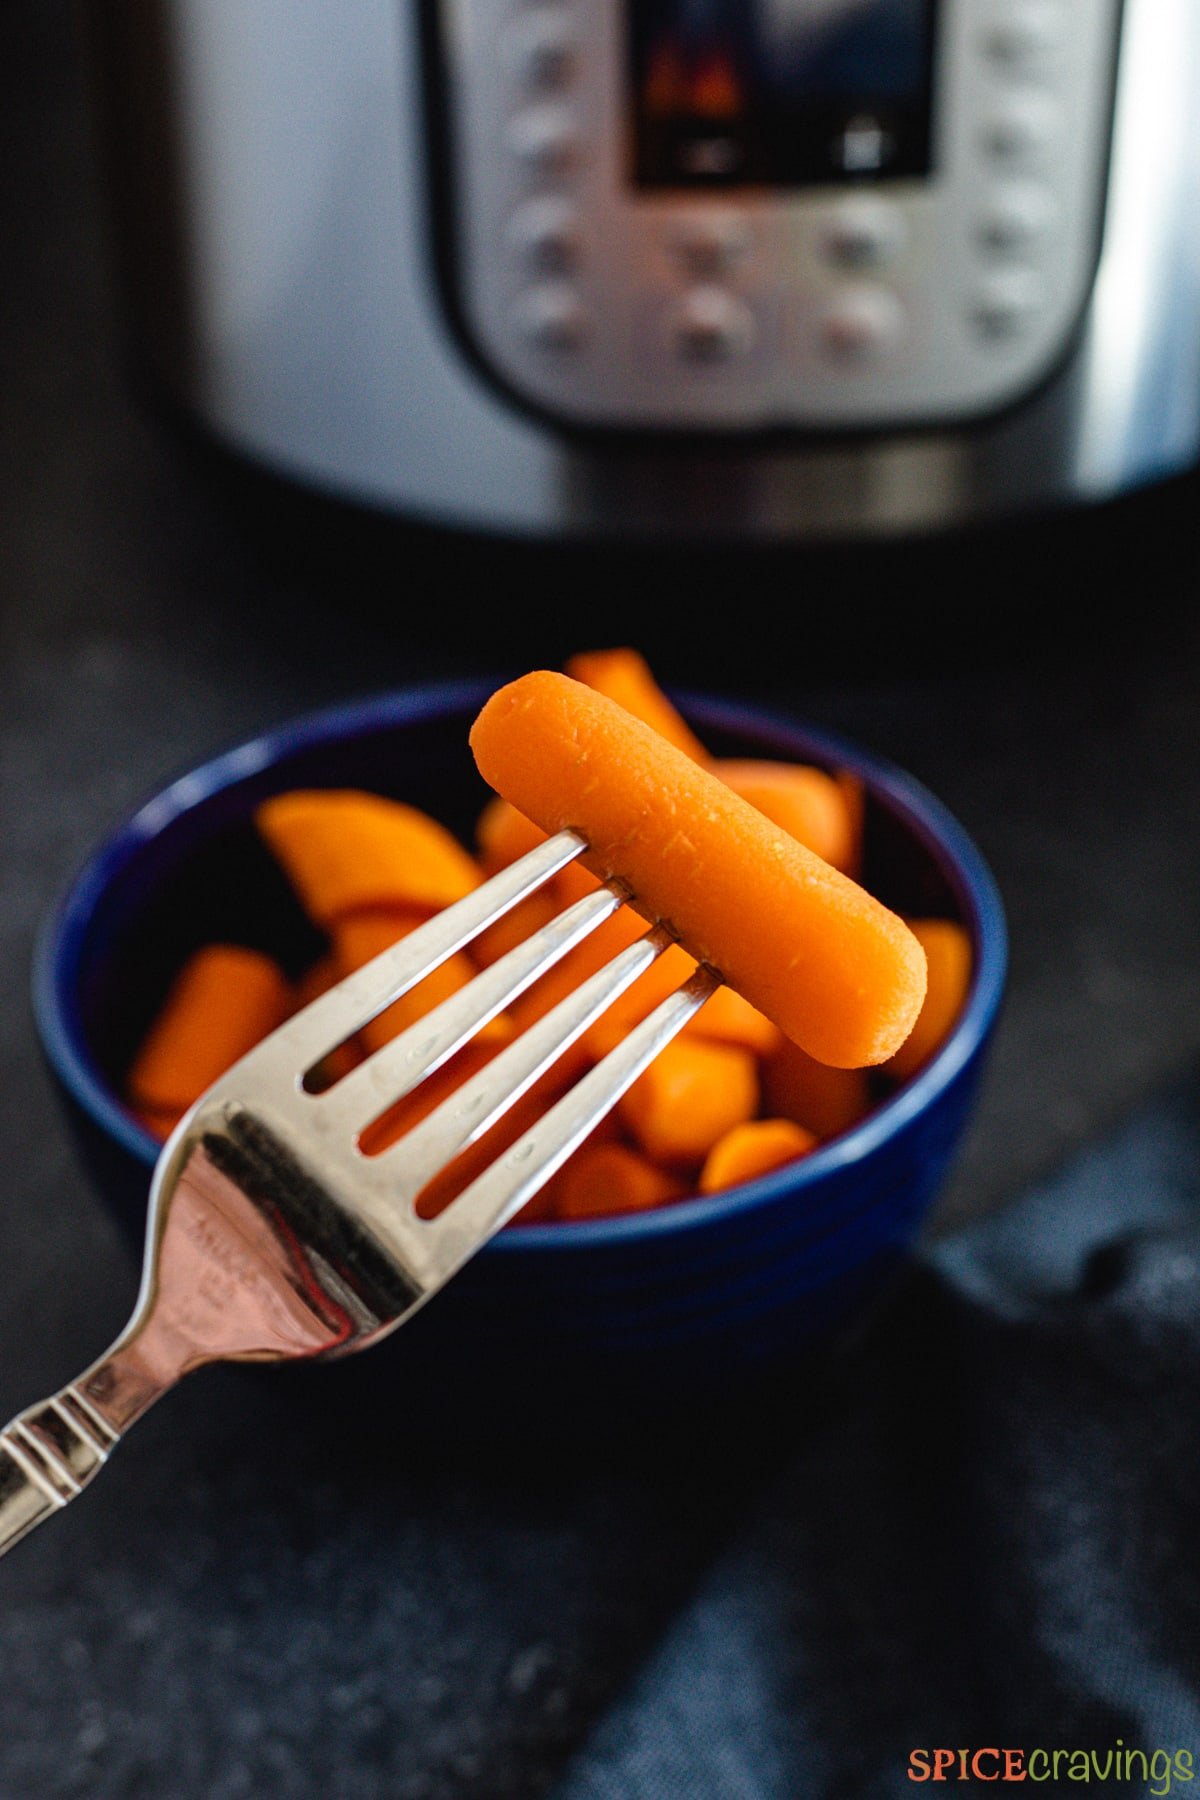 A fork lifting a carrot from a bowl with an Instant Pot in the background